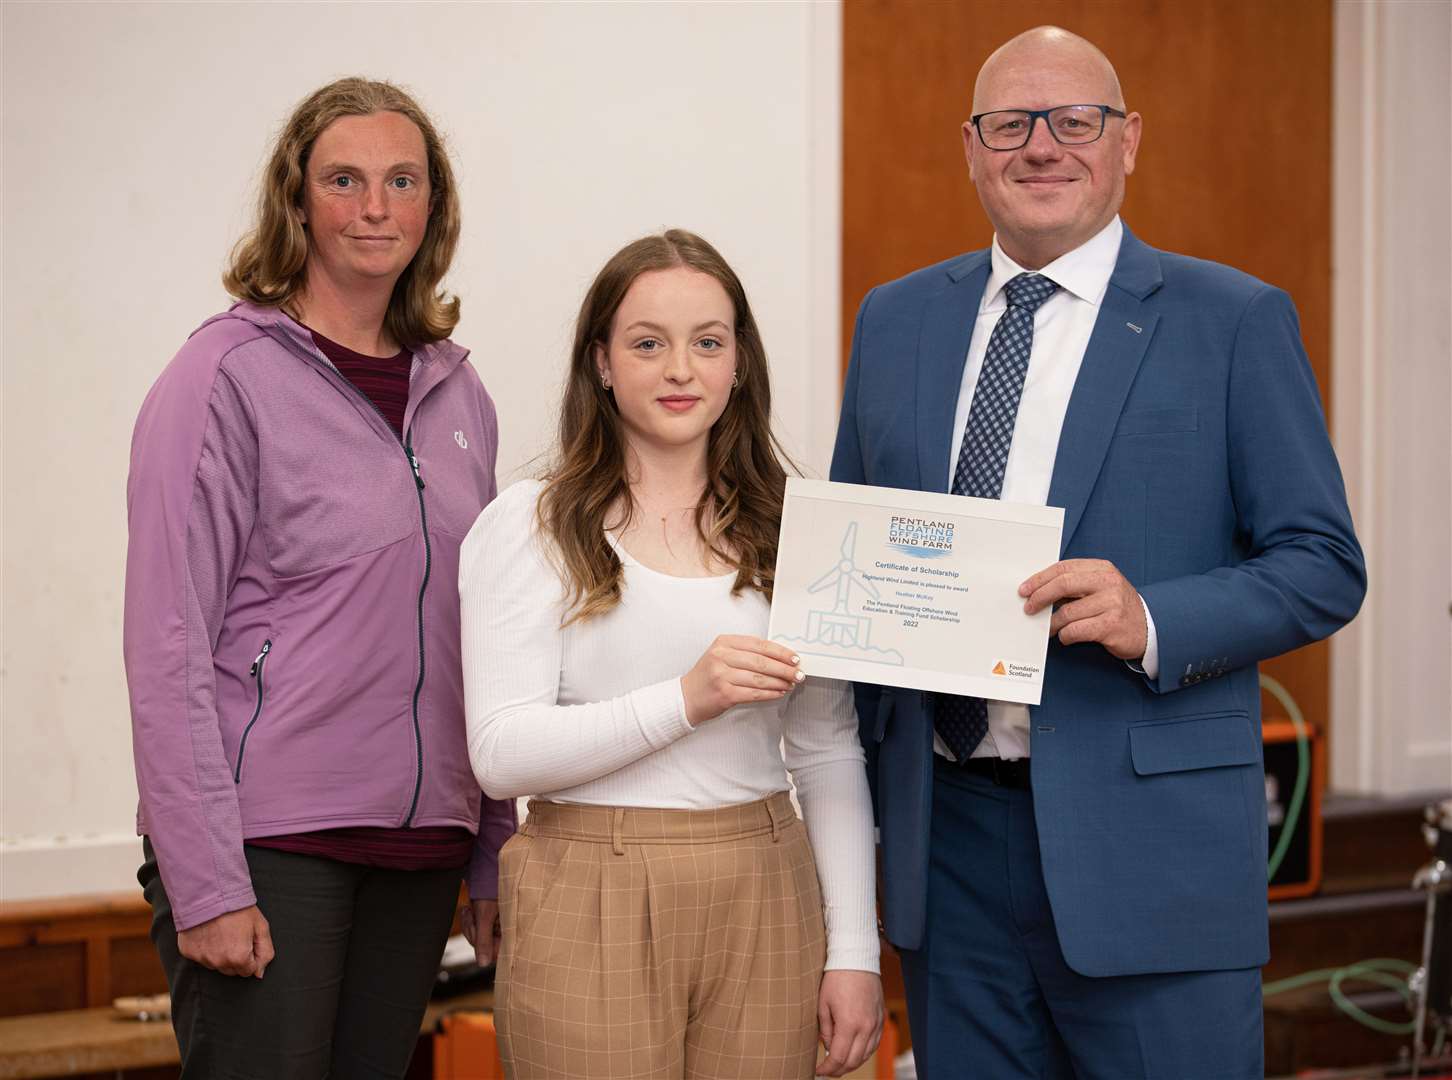 Eilidh Coll (left), from Foundation Scotland, and Anders Galsgaard, of Copenhagen Offshore Partners, with bursary recipient Heather McKay.